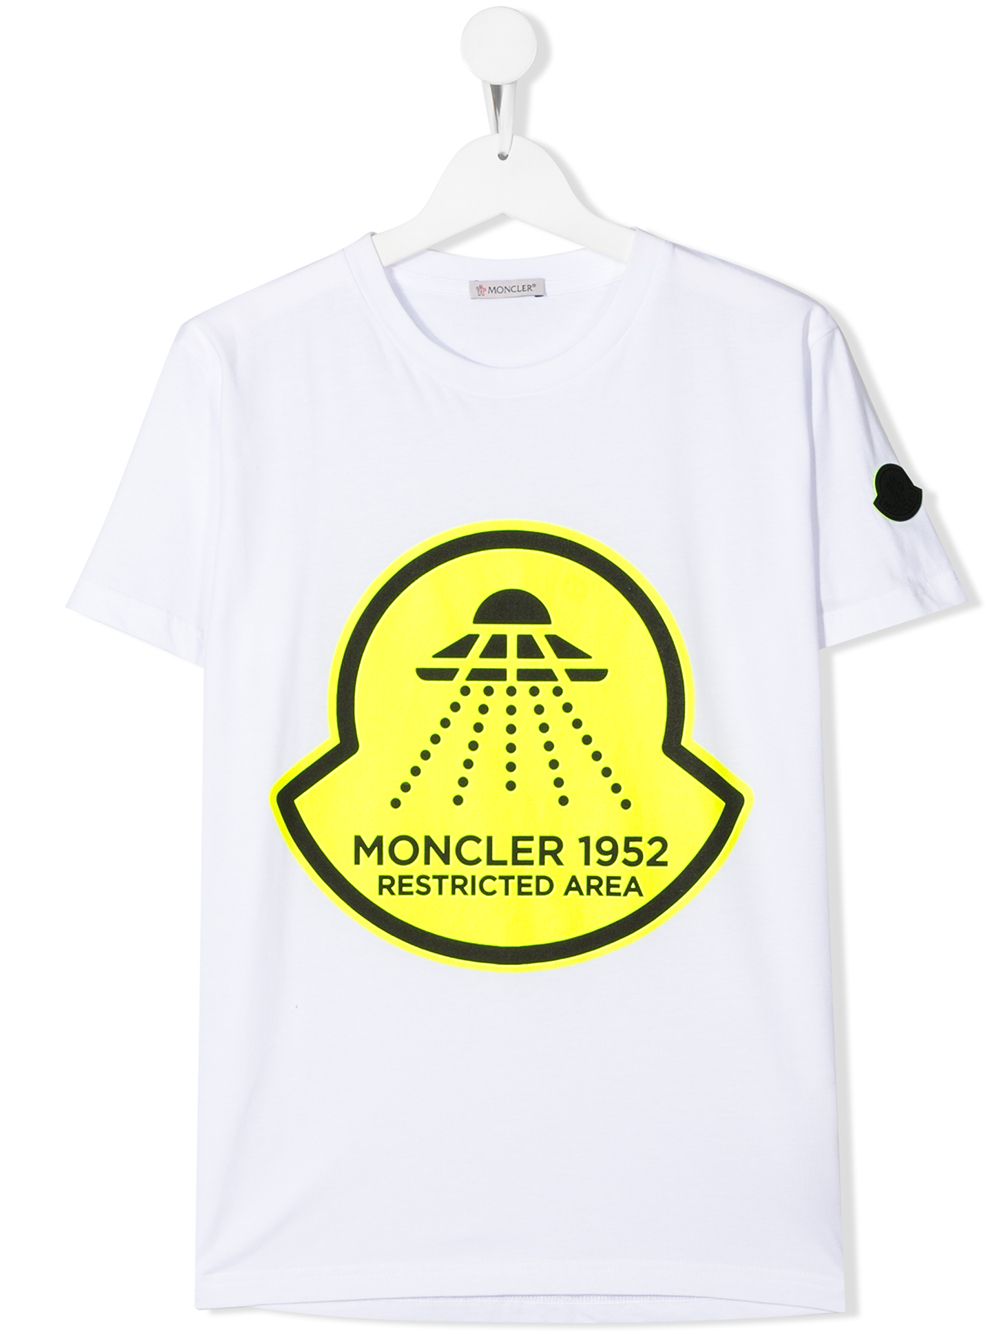 MONCLER RESTRICTED AREA PRINT LOGO PATCH T-SHIRT